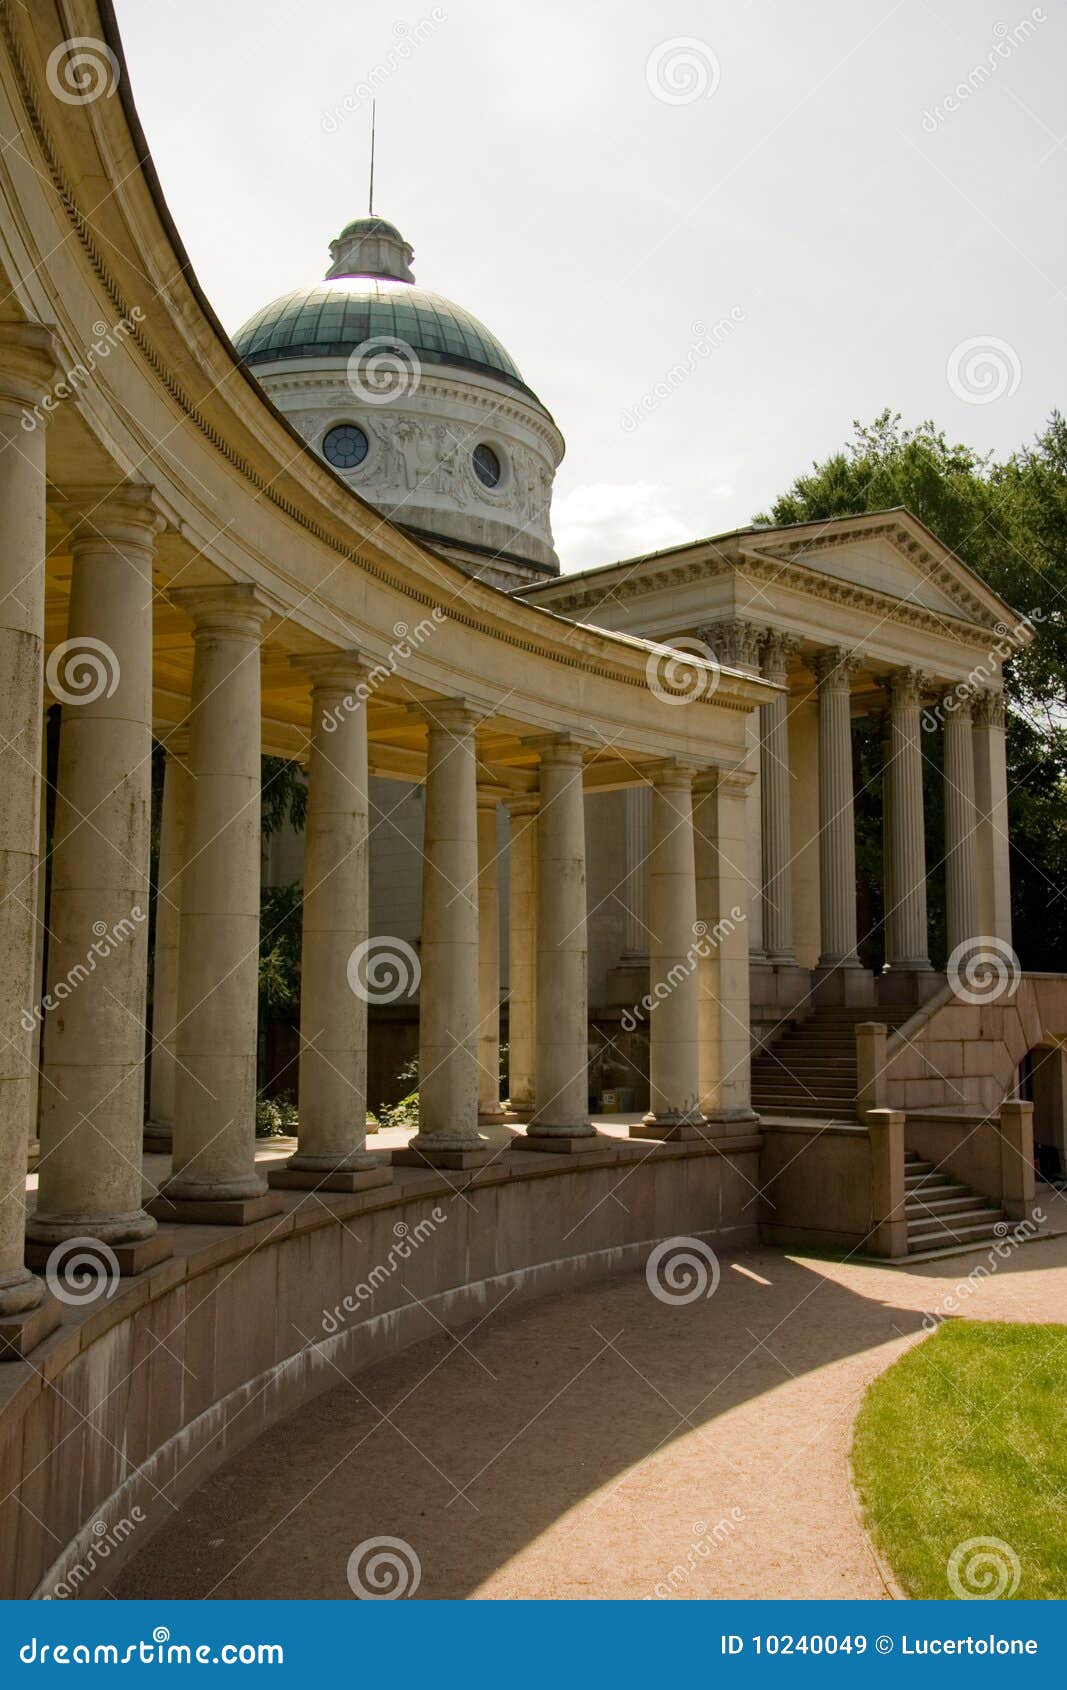 Moscow. Arkhangelskoye stock image. Image of state, statue - 10240049